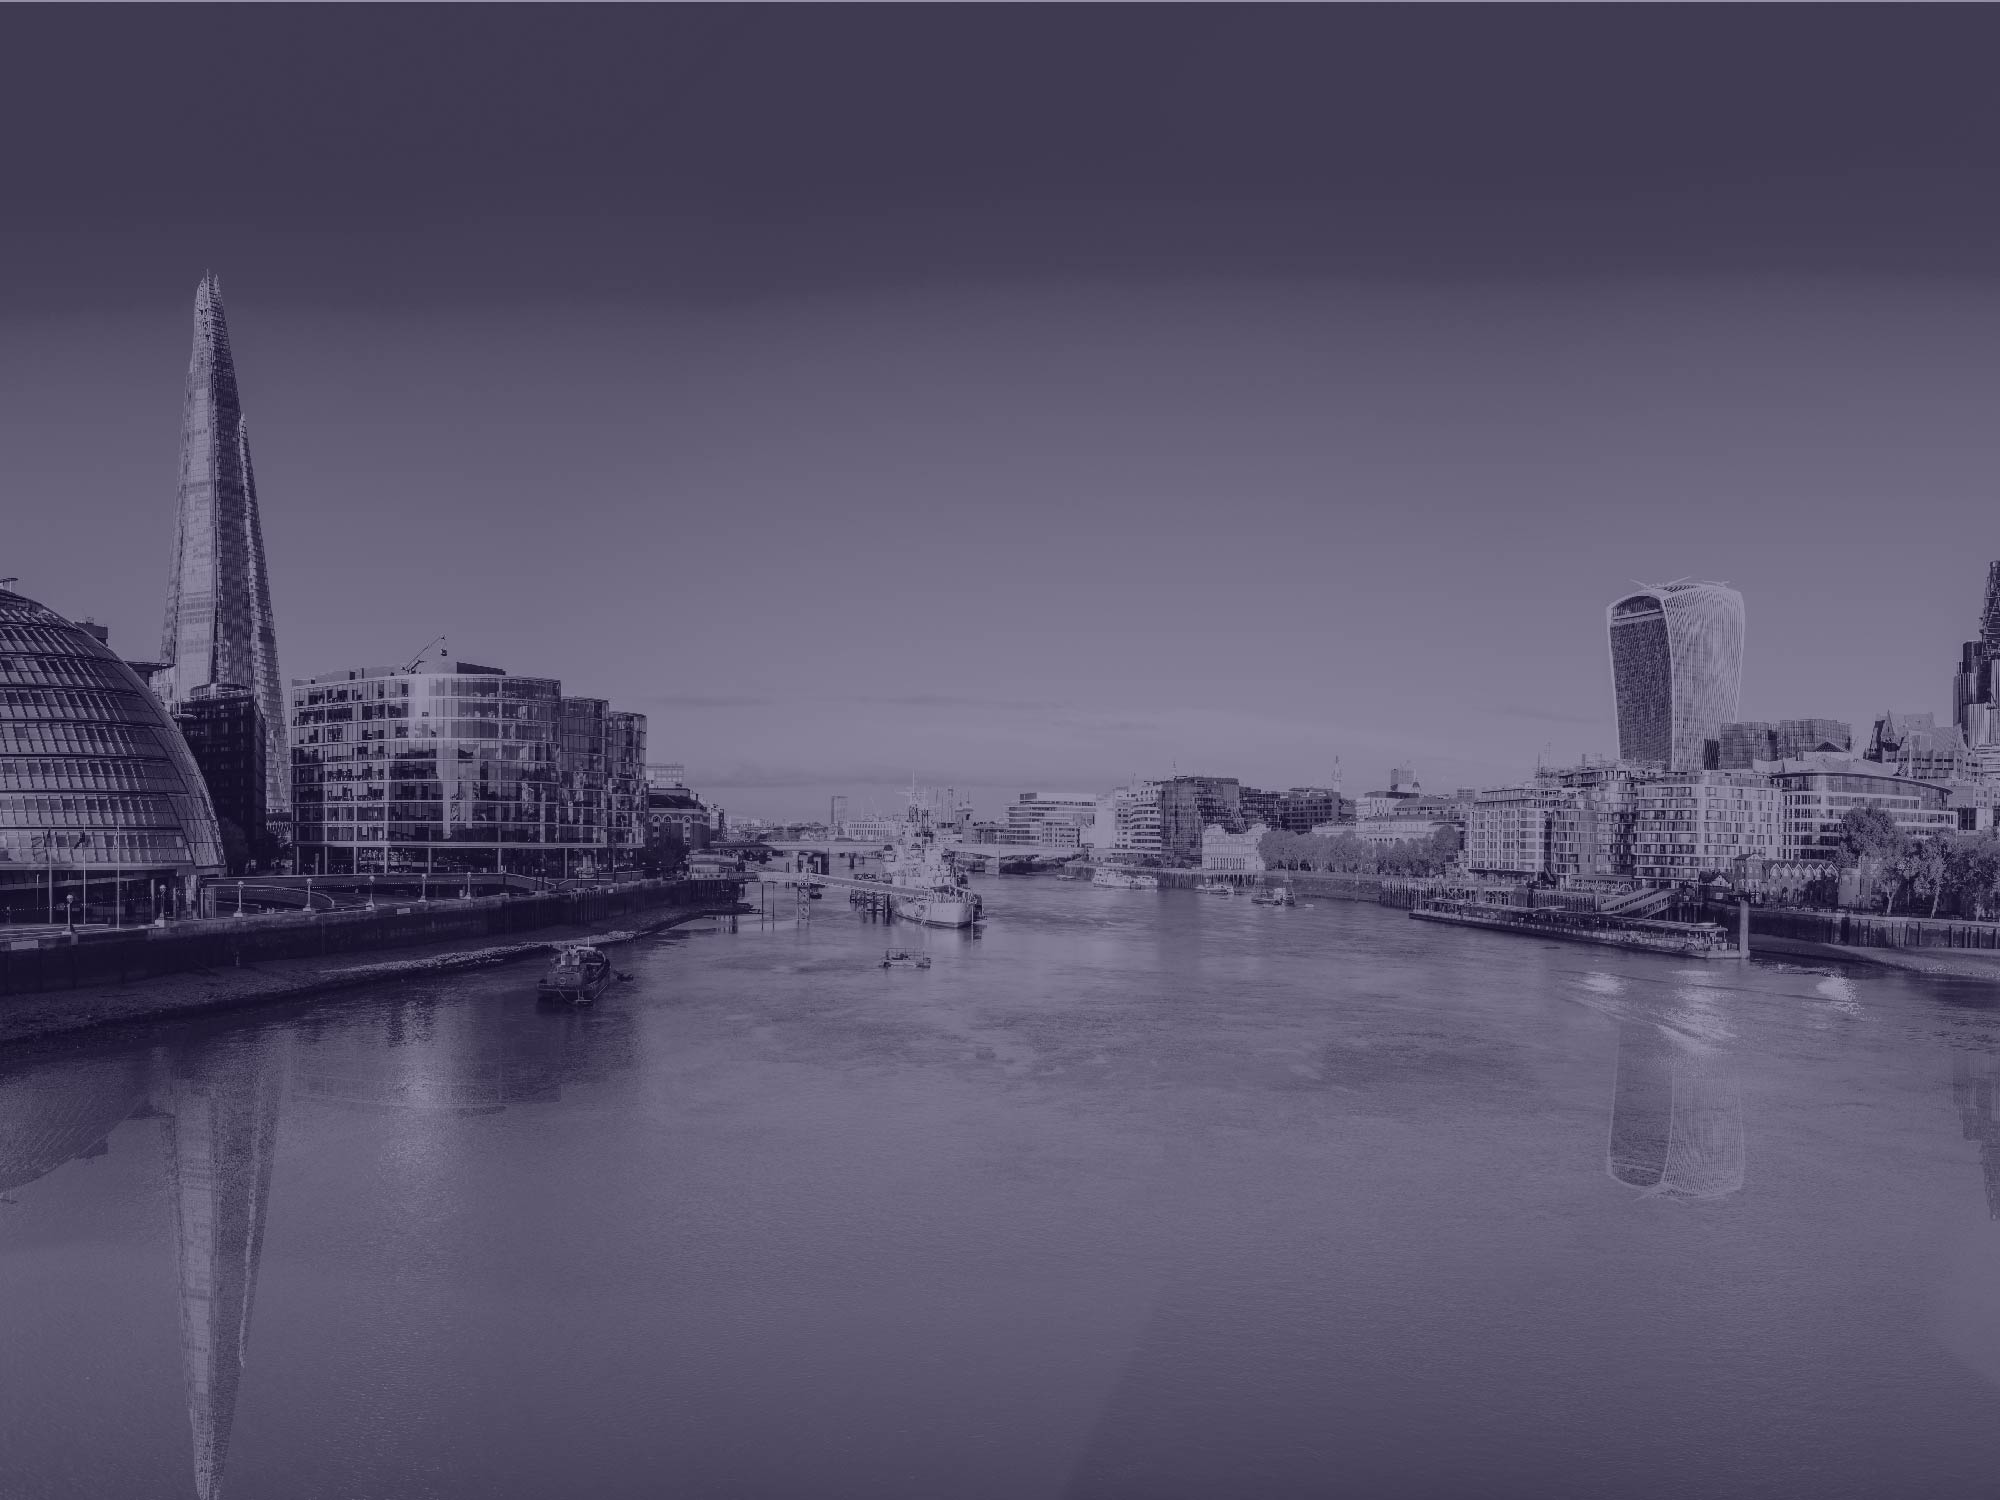 Recordsure's London office and the river thames image